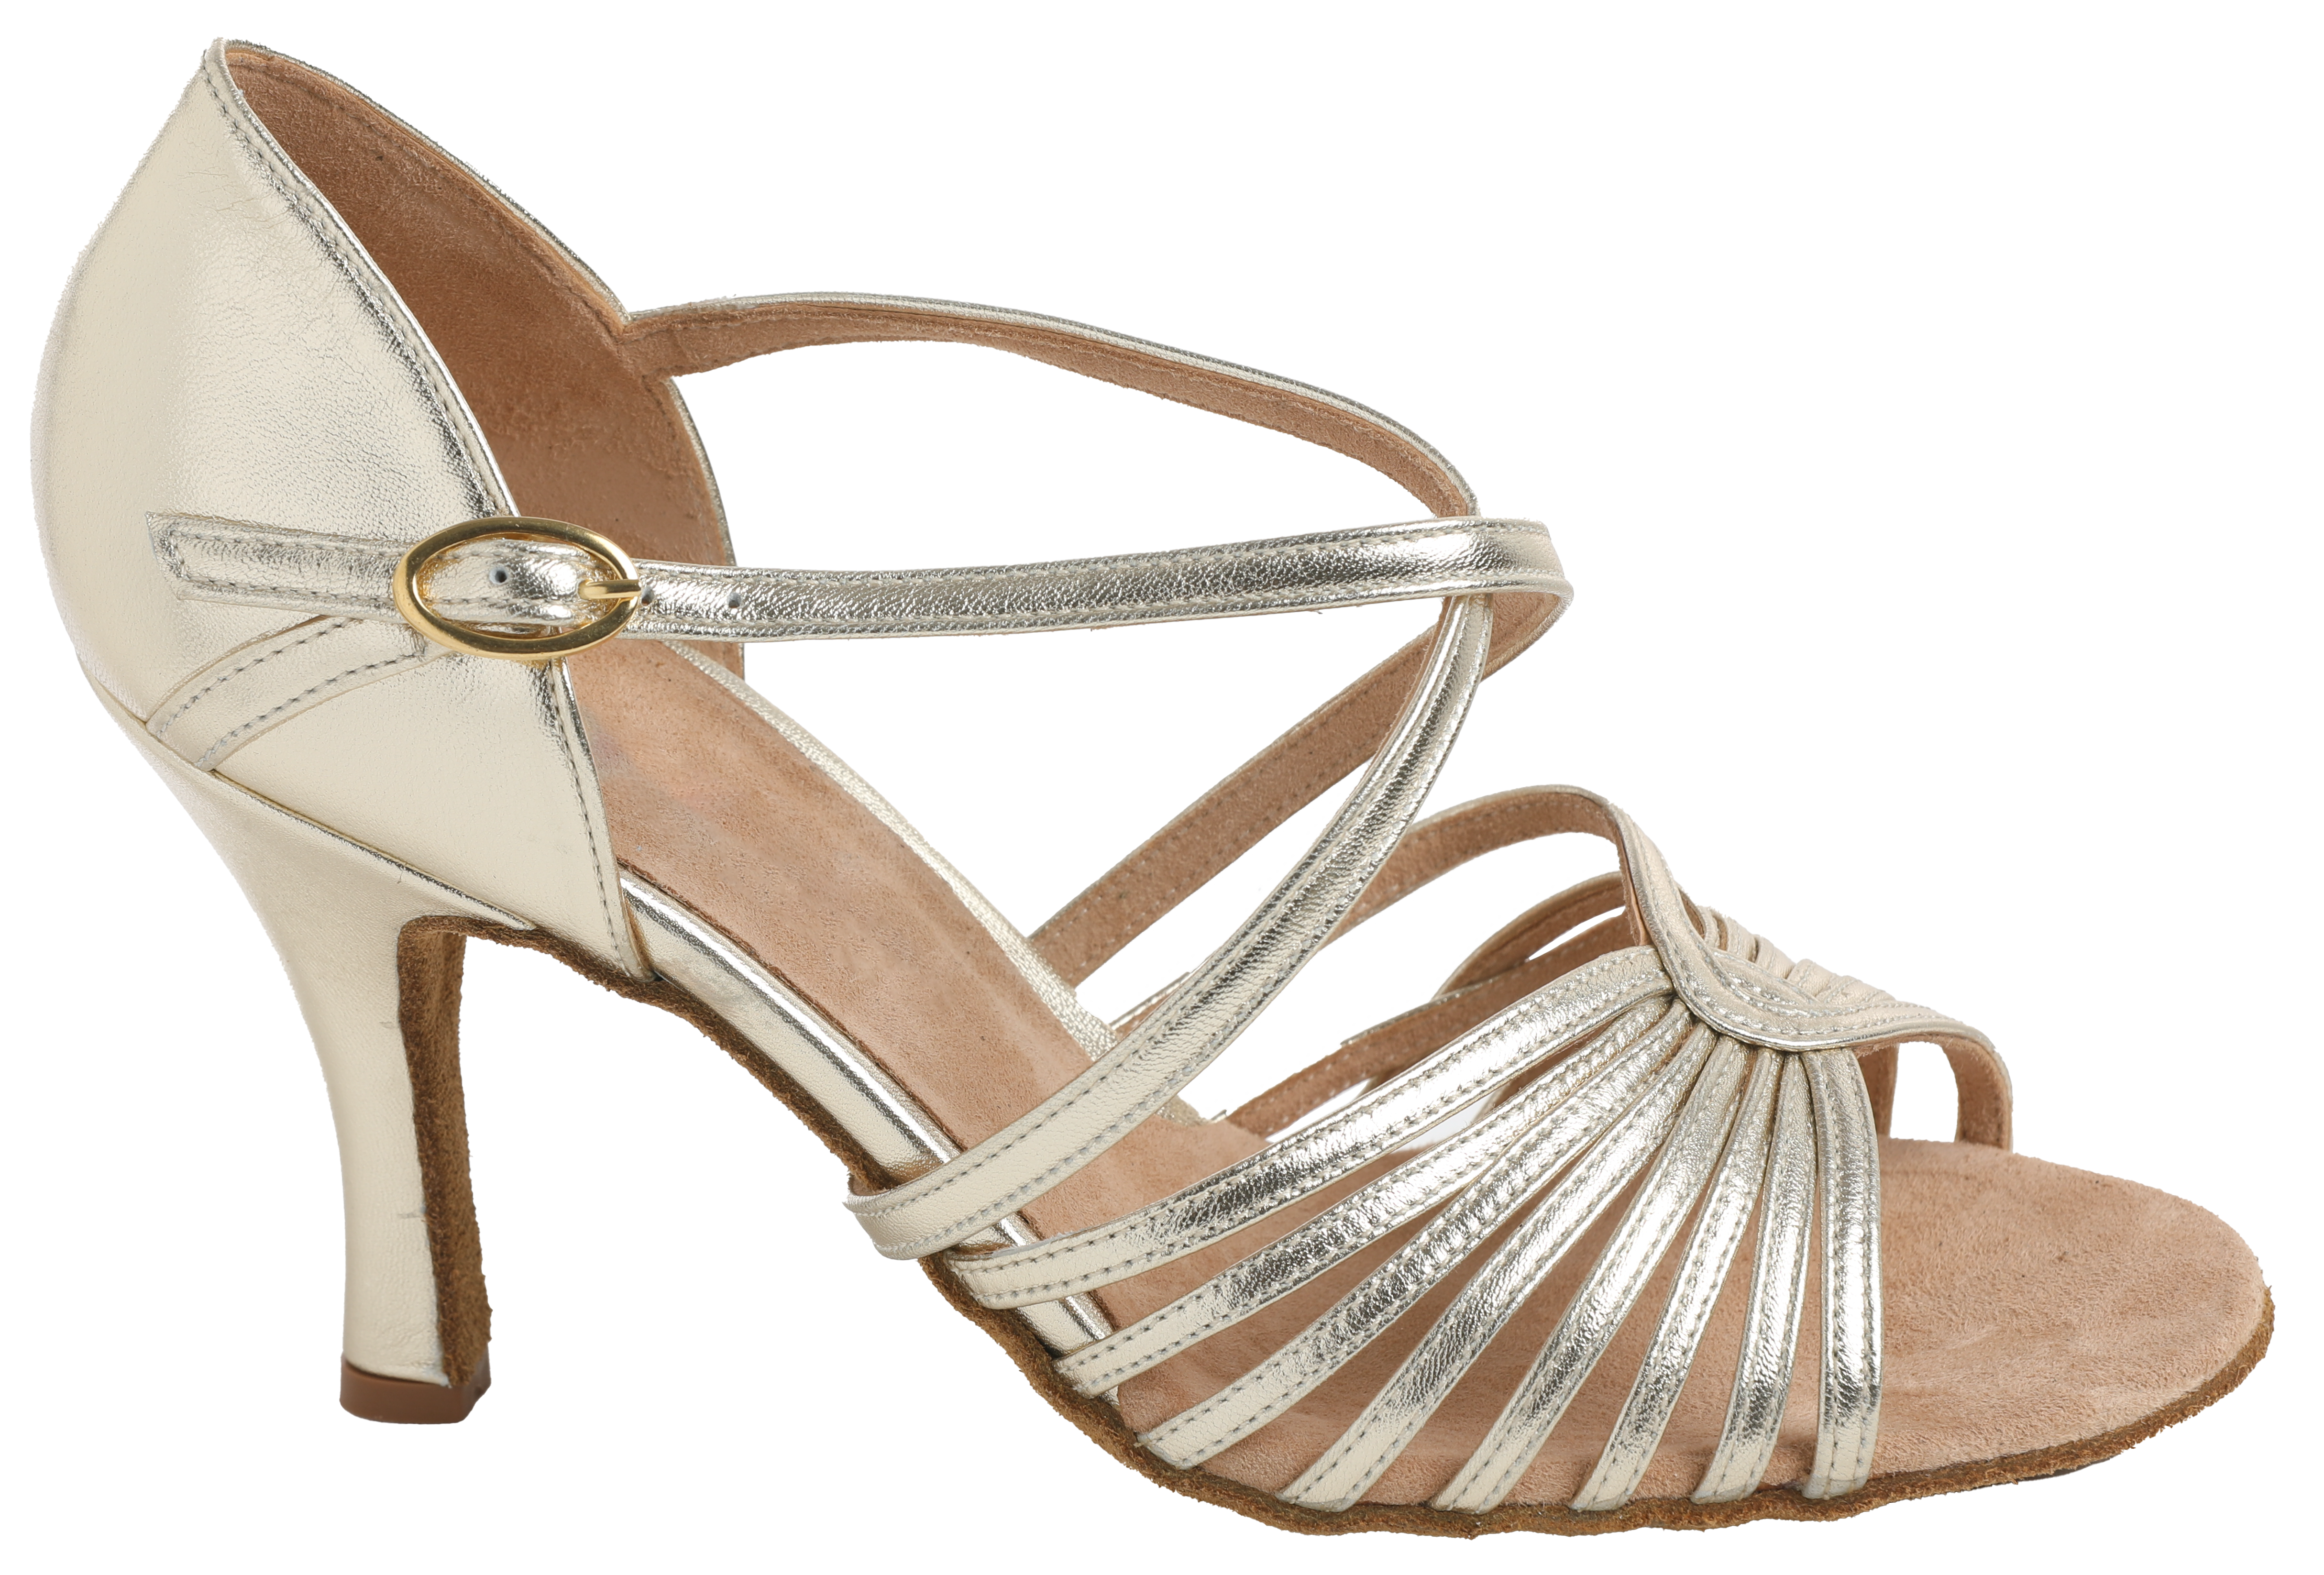 Side profile of Energy Ladies Latin Dance Shoes in Platinum leather with intertwining straps